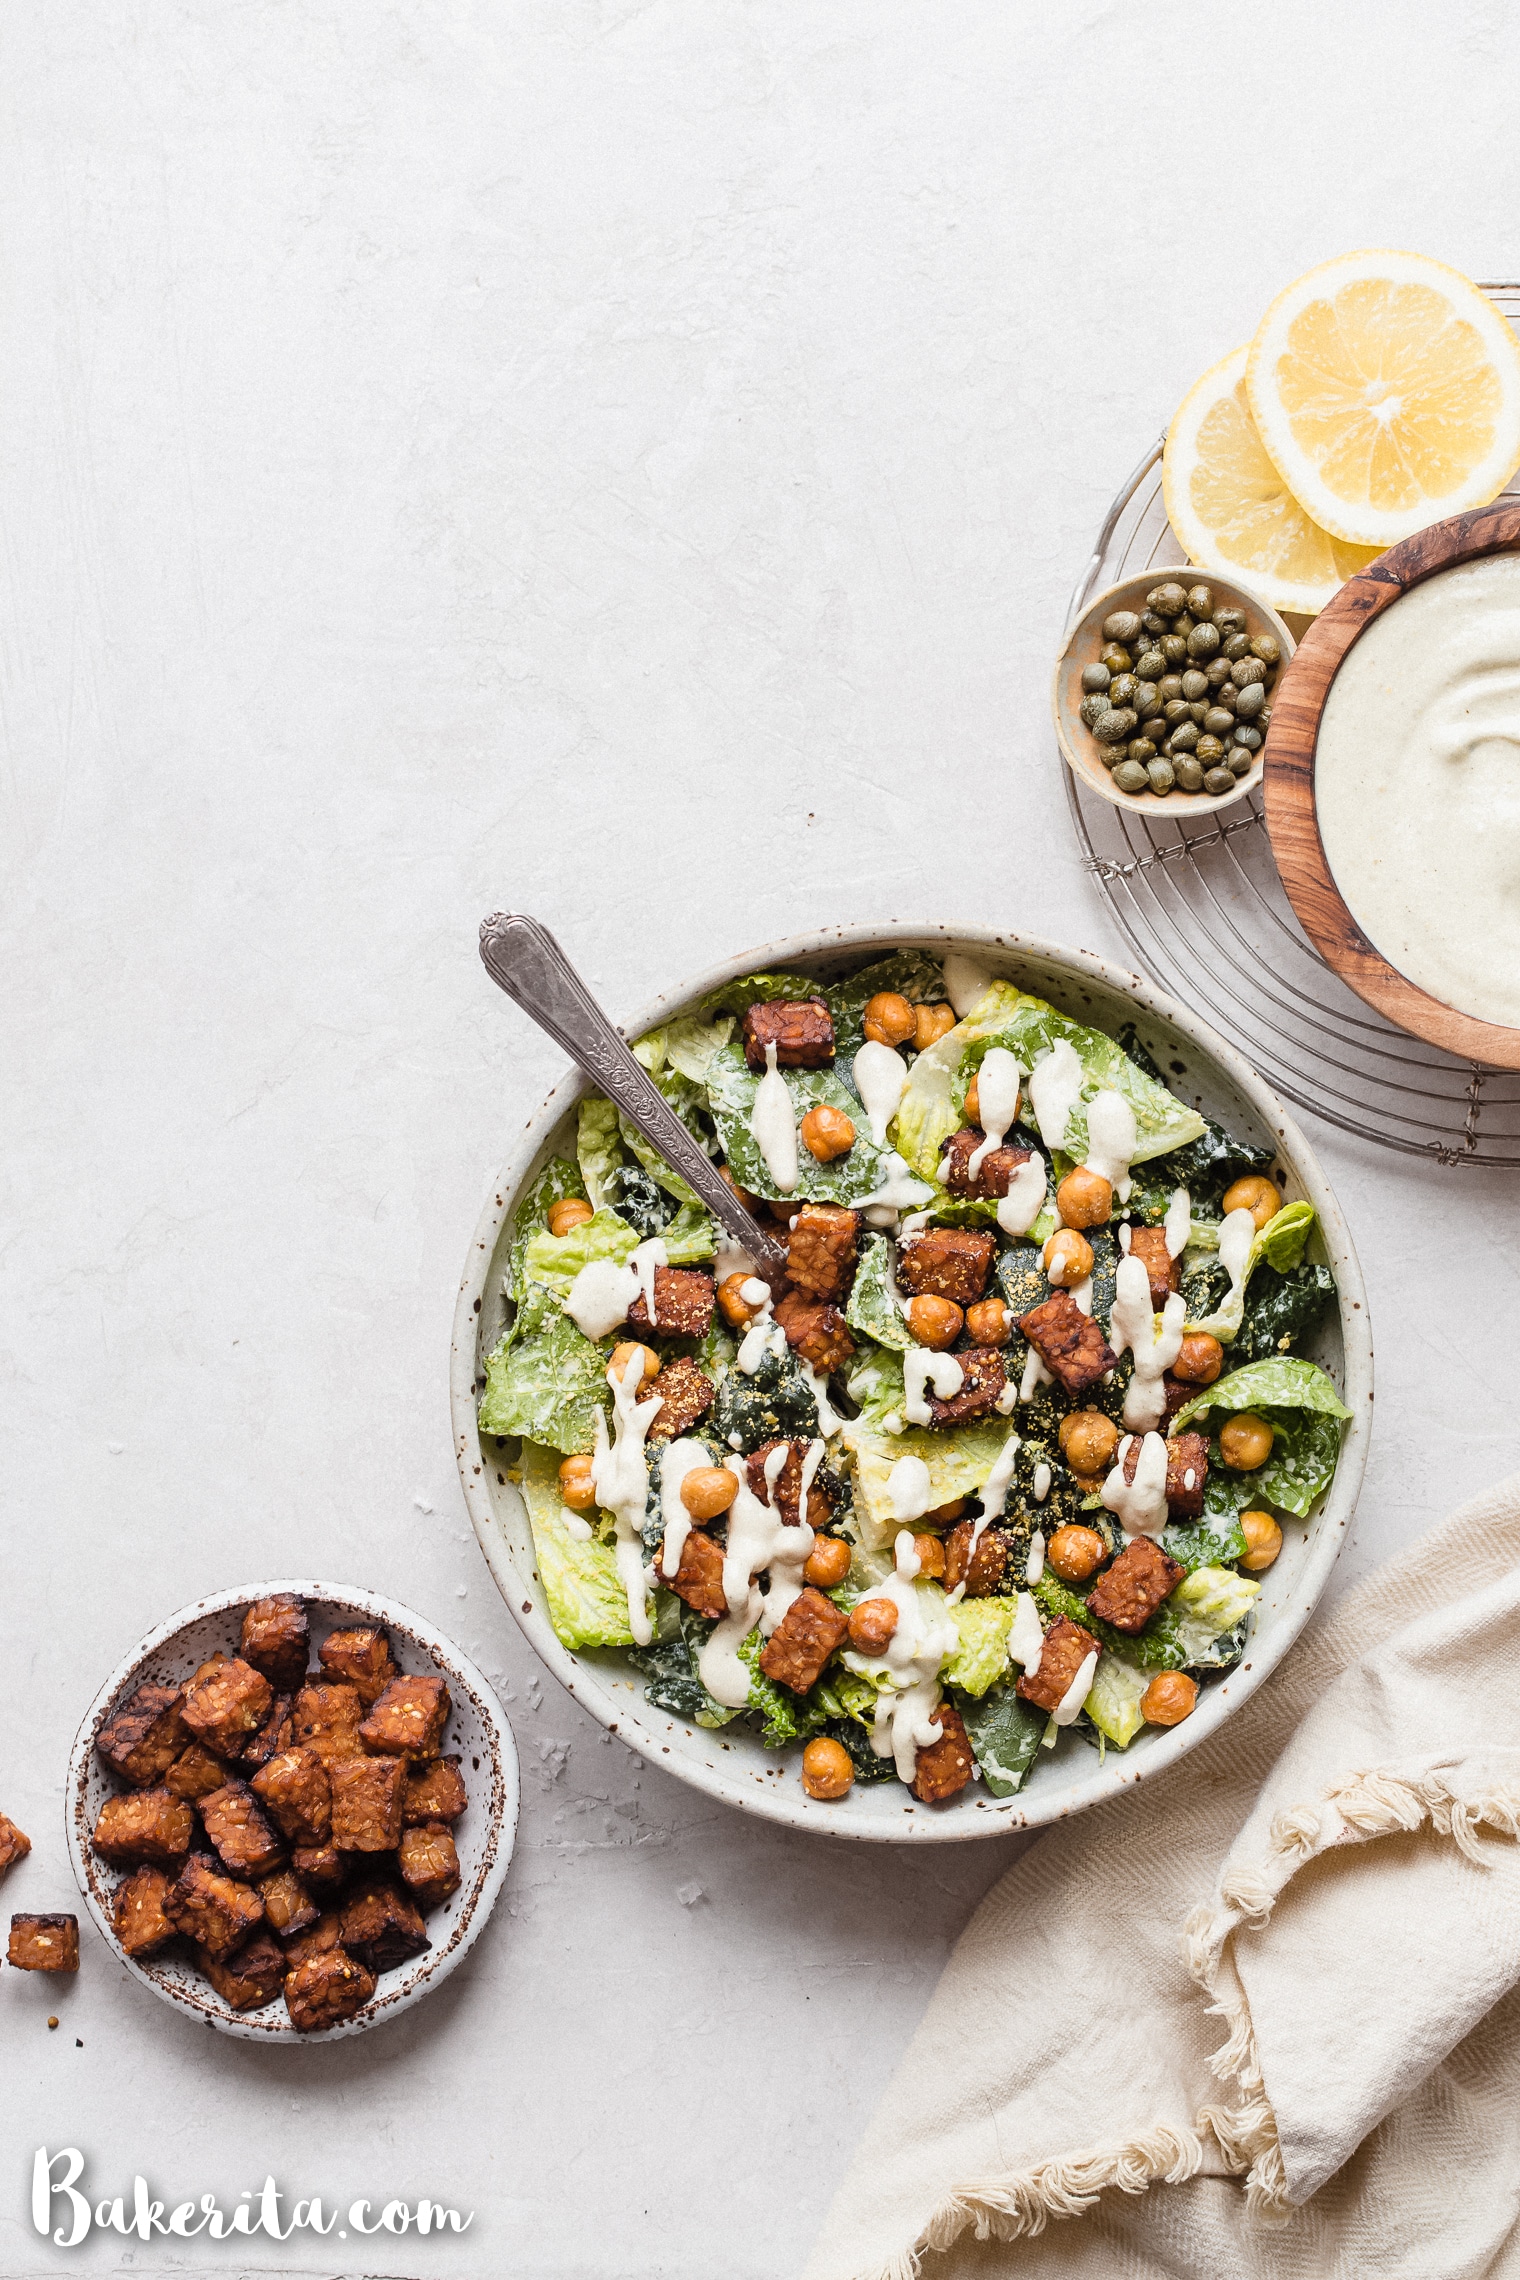 Serve this Vegan Caesar Salad with Crispy Tempeh & Crunchy Chickpeas for lunch or dinner - it's delicious anytime! The crispy marined tempeh is incredibly flavorful and filling and the chickpeas add lots of crunch. 